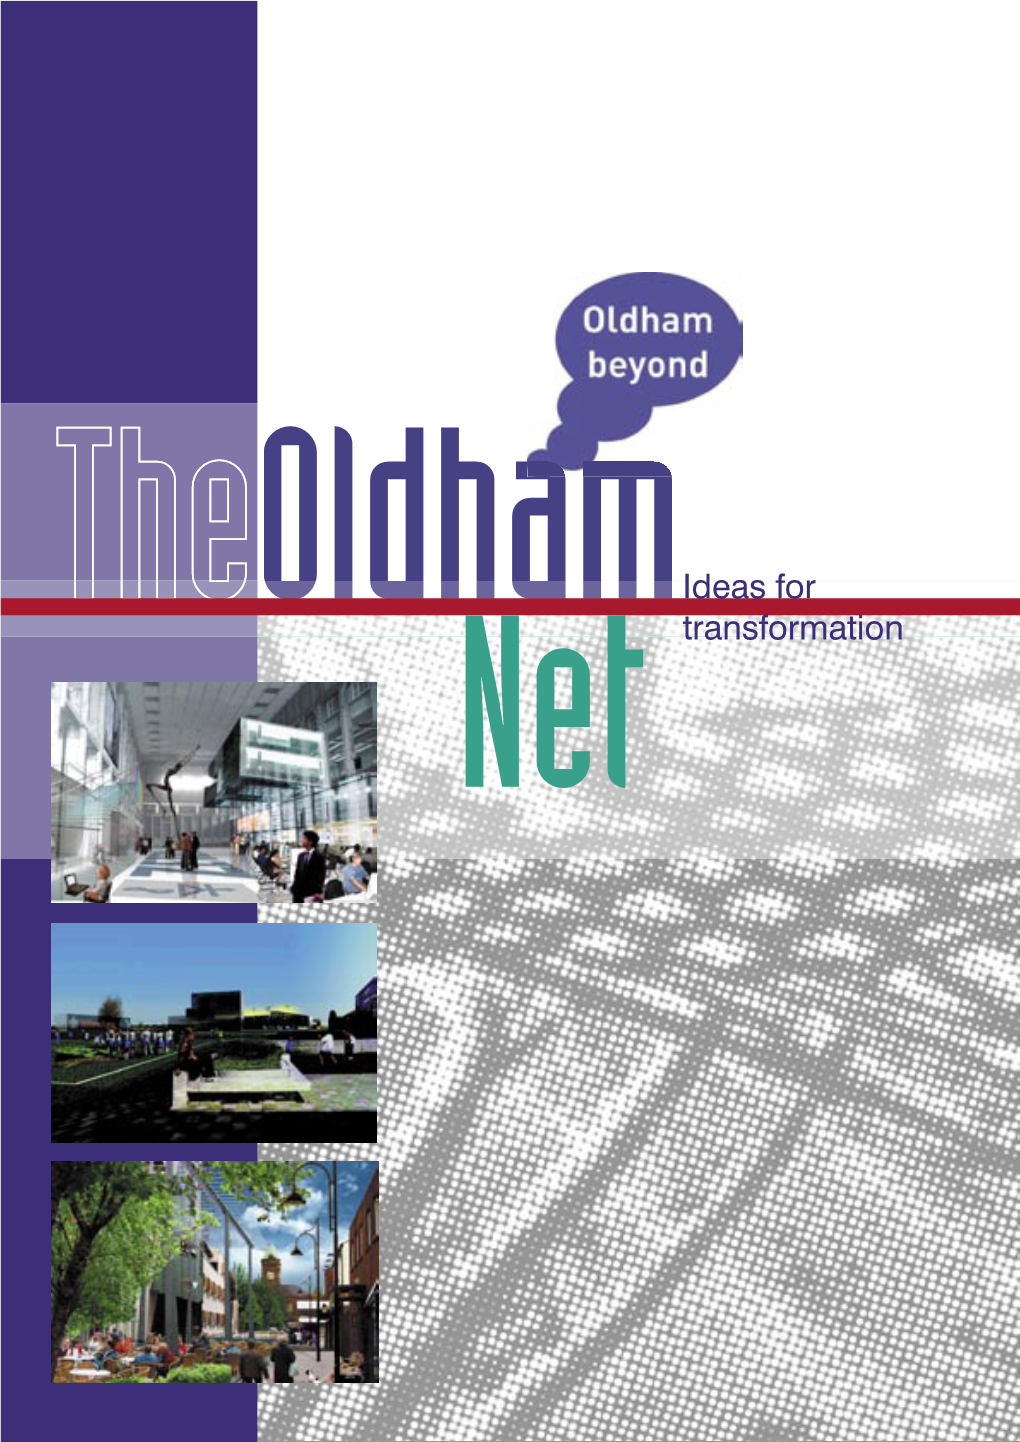 The Oldham Local Strategic Partnership (LSP) and the North West Development Agency (NWDA), and Produced by a Team of Consultants Led by URBED